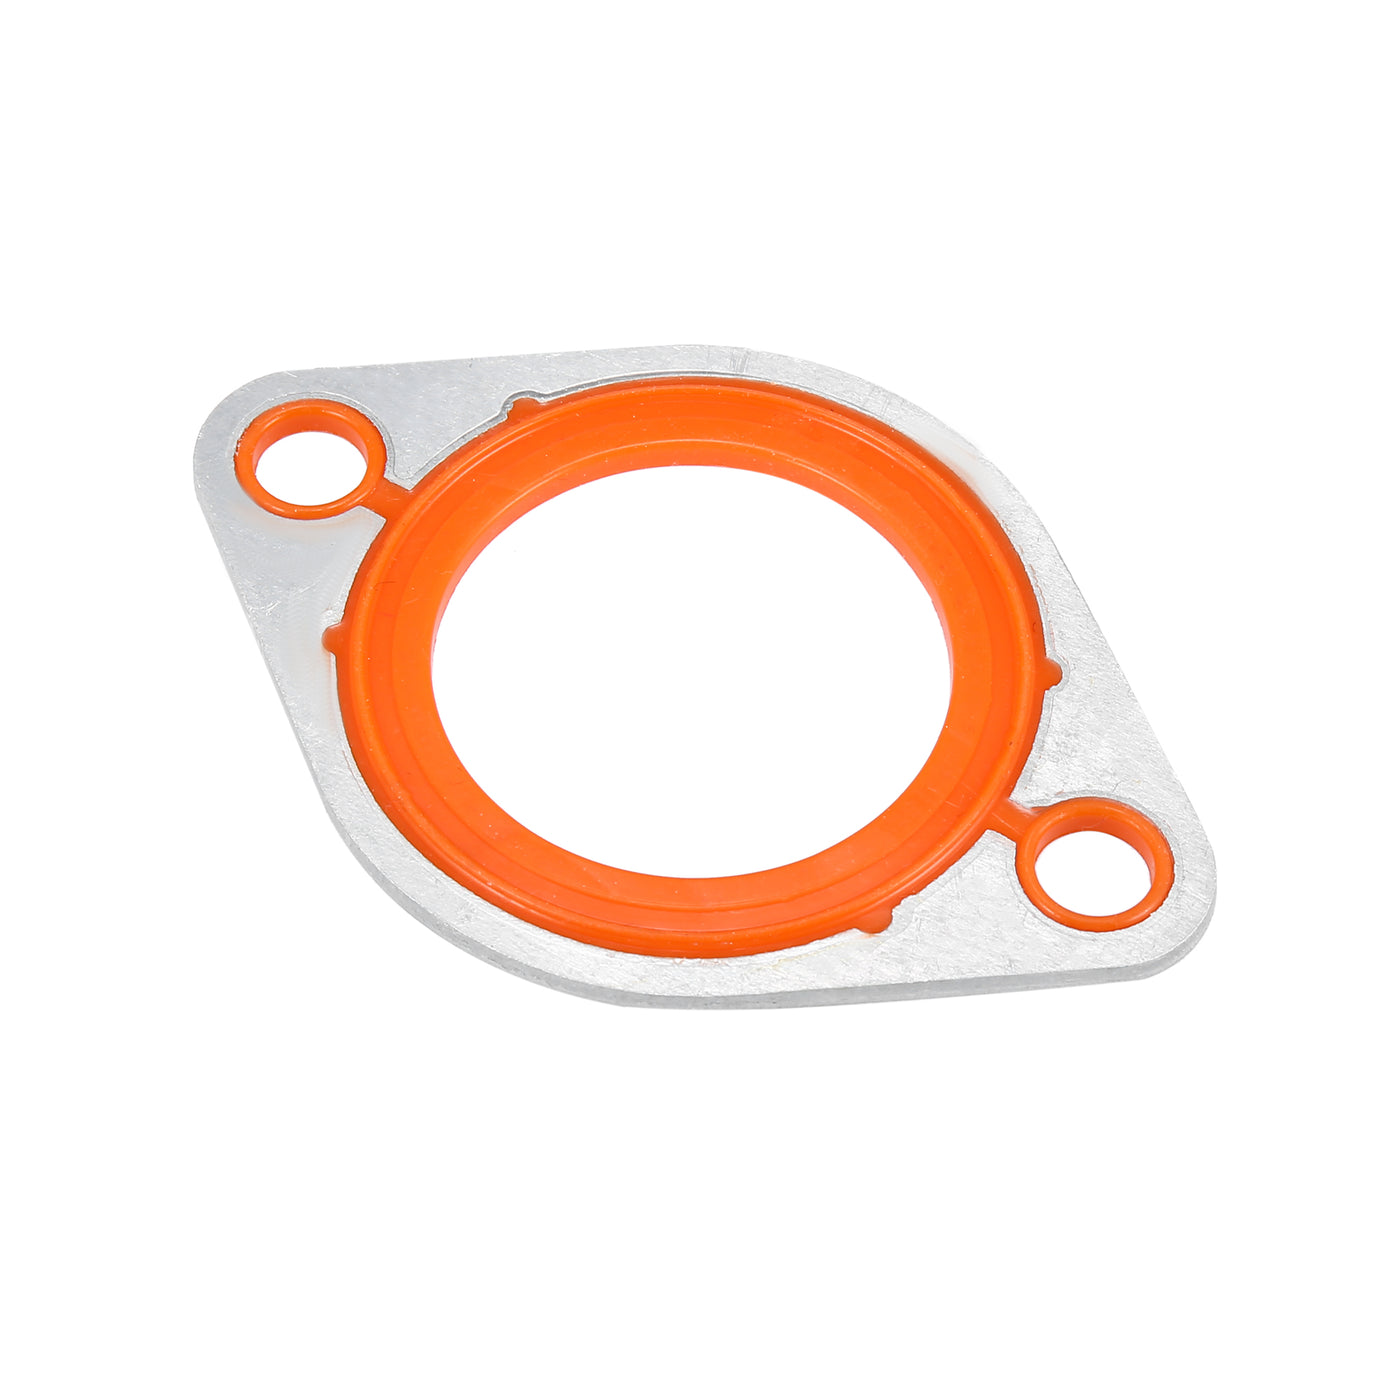 X AUTOHAUX Aluminum Silicone Thermostat Water Neck Thermostat Housing Gasket Seal Replacement for Chevy SBC BBC 265 283 305 327 350 383 396 400 427 454 472 500